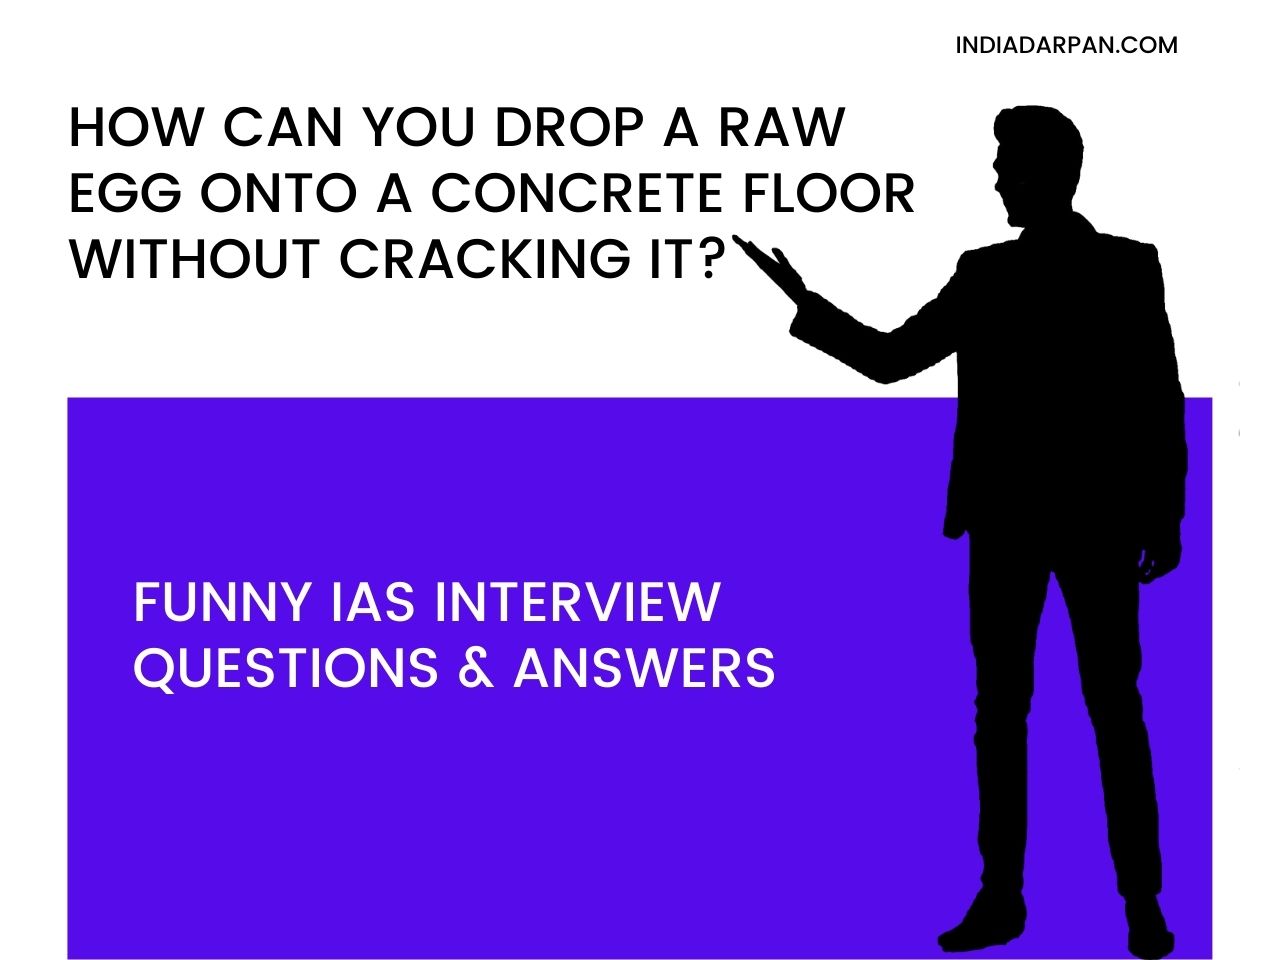 Funny IAS Interview Questions & Answers 2022 - India Darpan